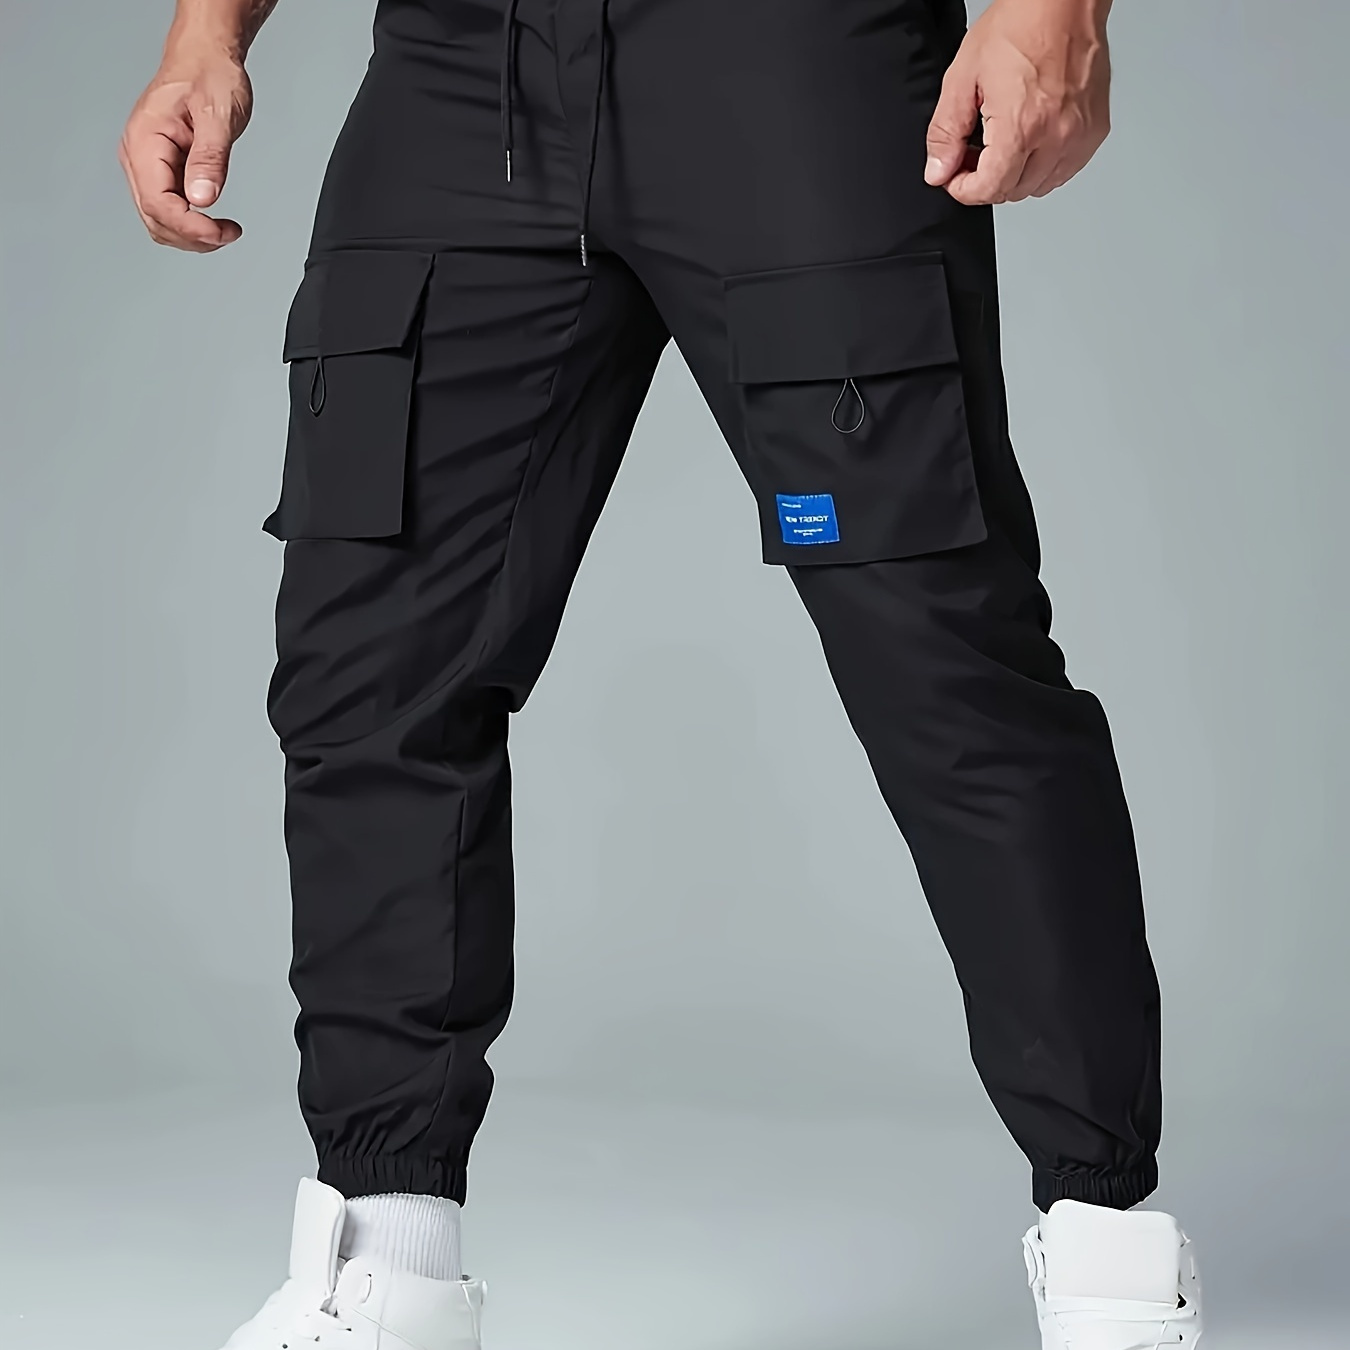 

Men's Cargo Pants Outdoor Hiking Multi-pocket Utility Long Trousers, Casual Style, For All Seasons